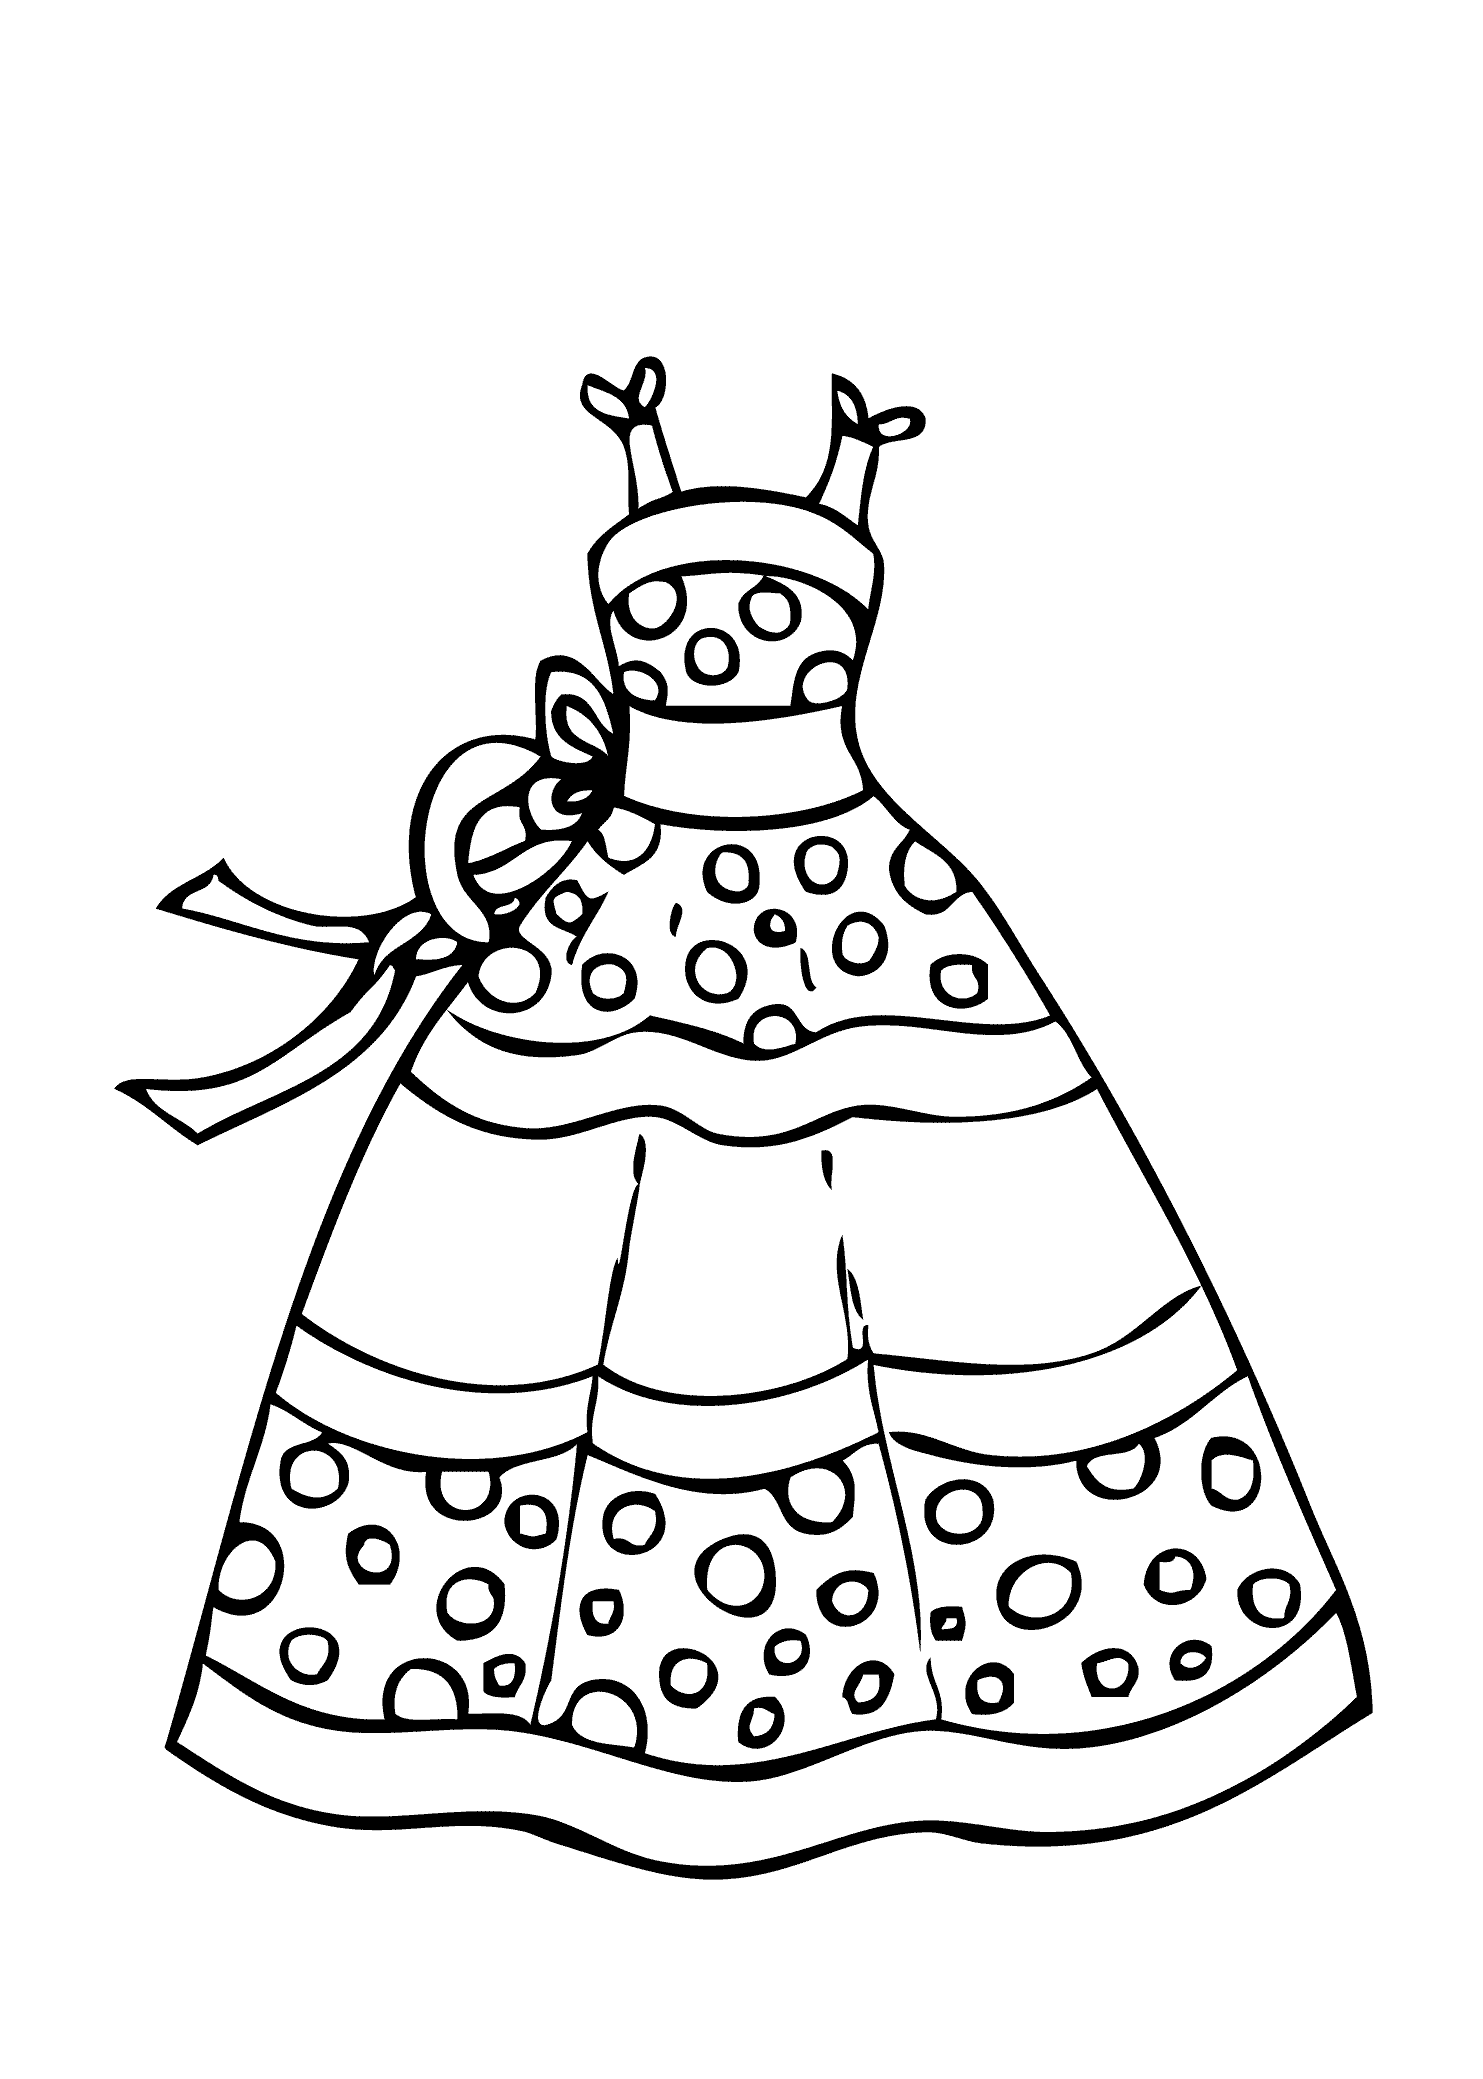 dresses coloring pages dress coloring pages to download and print for free dresses pages coloring 